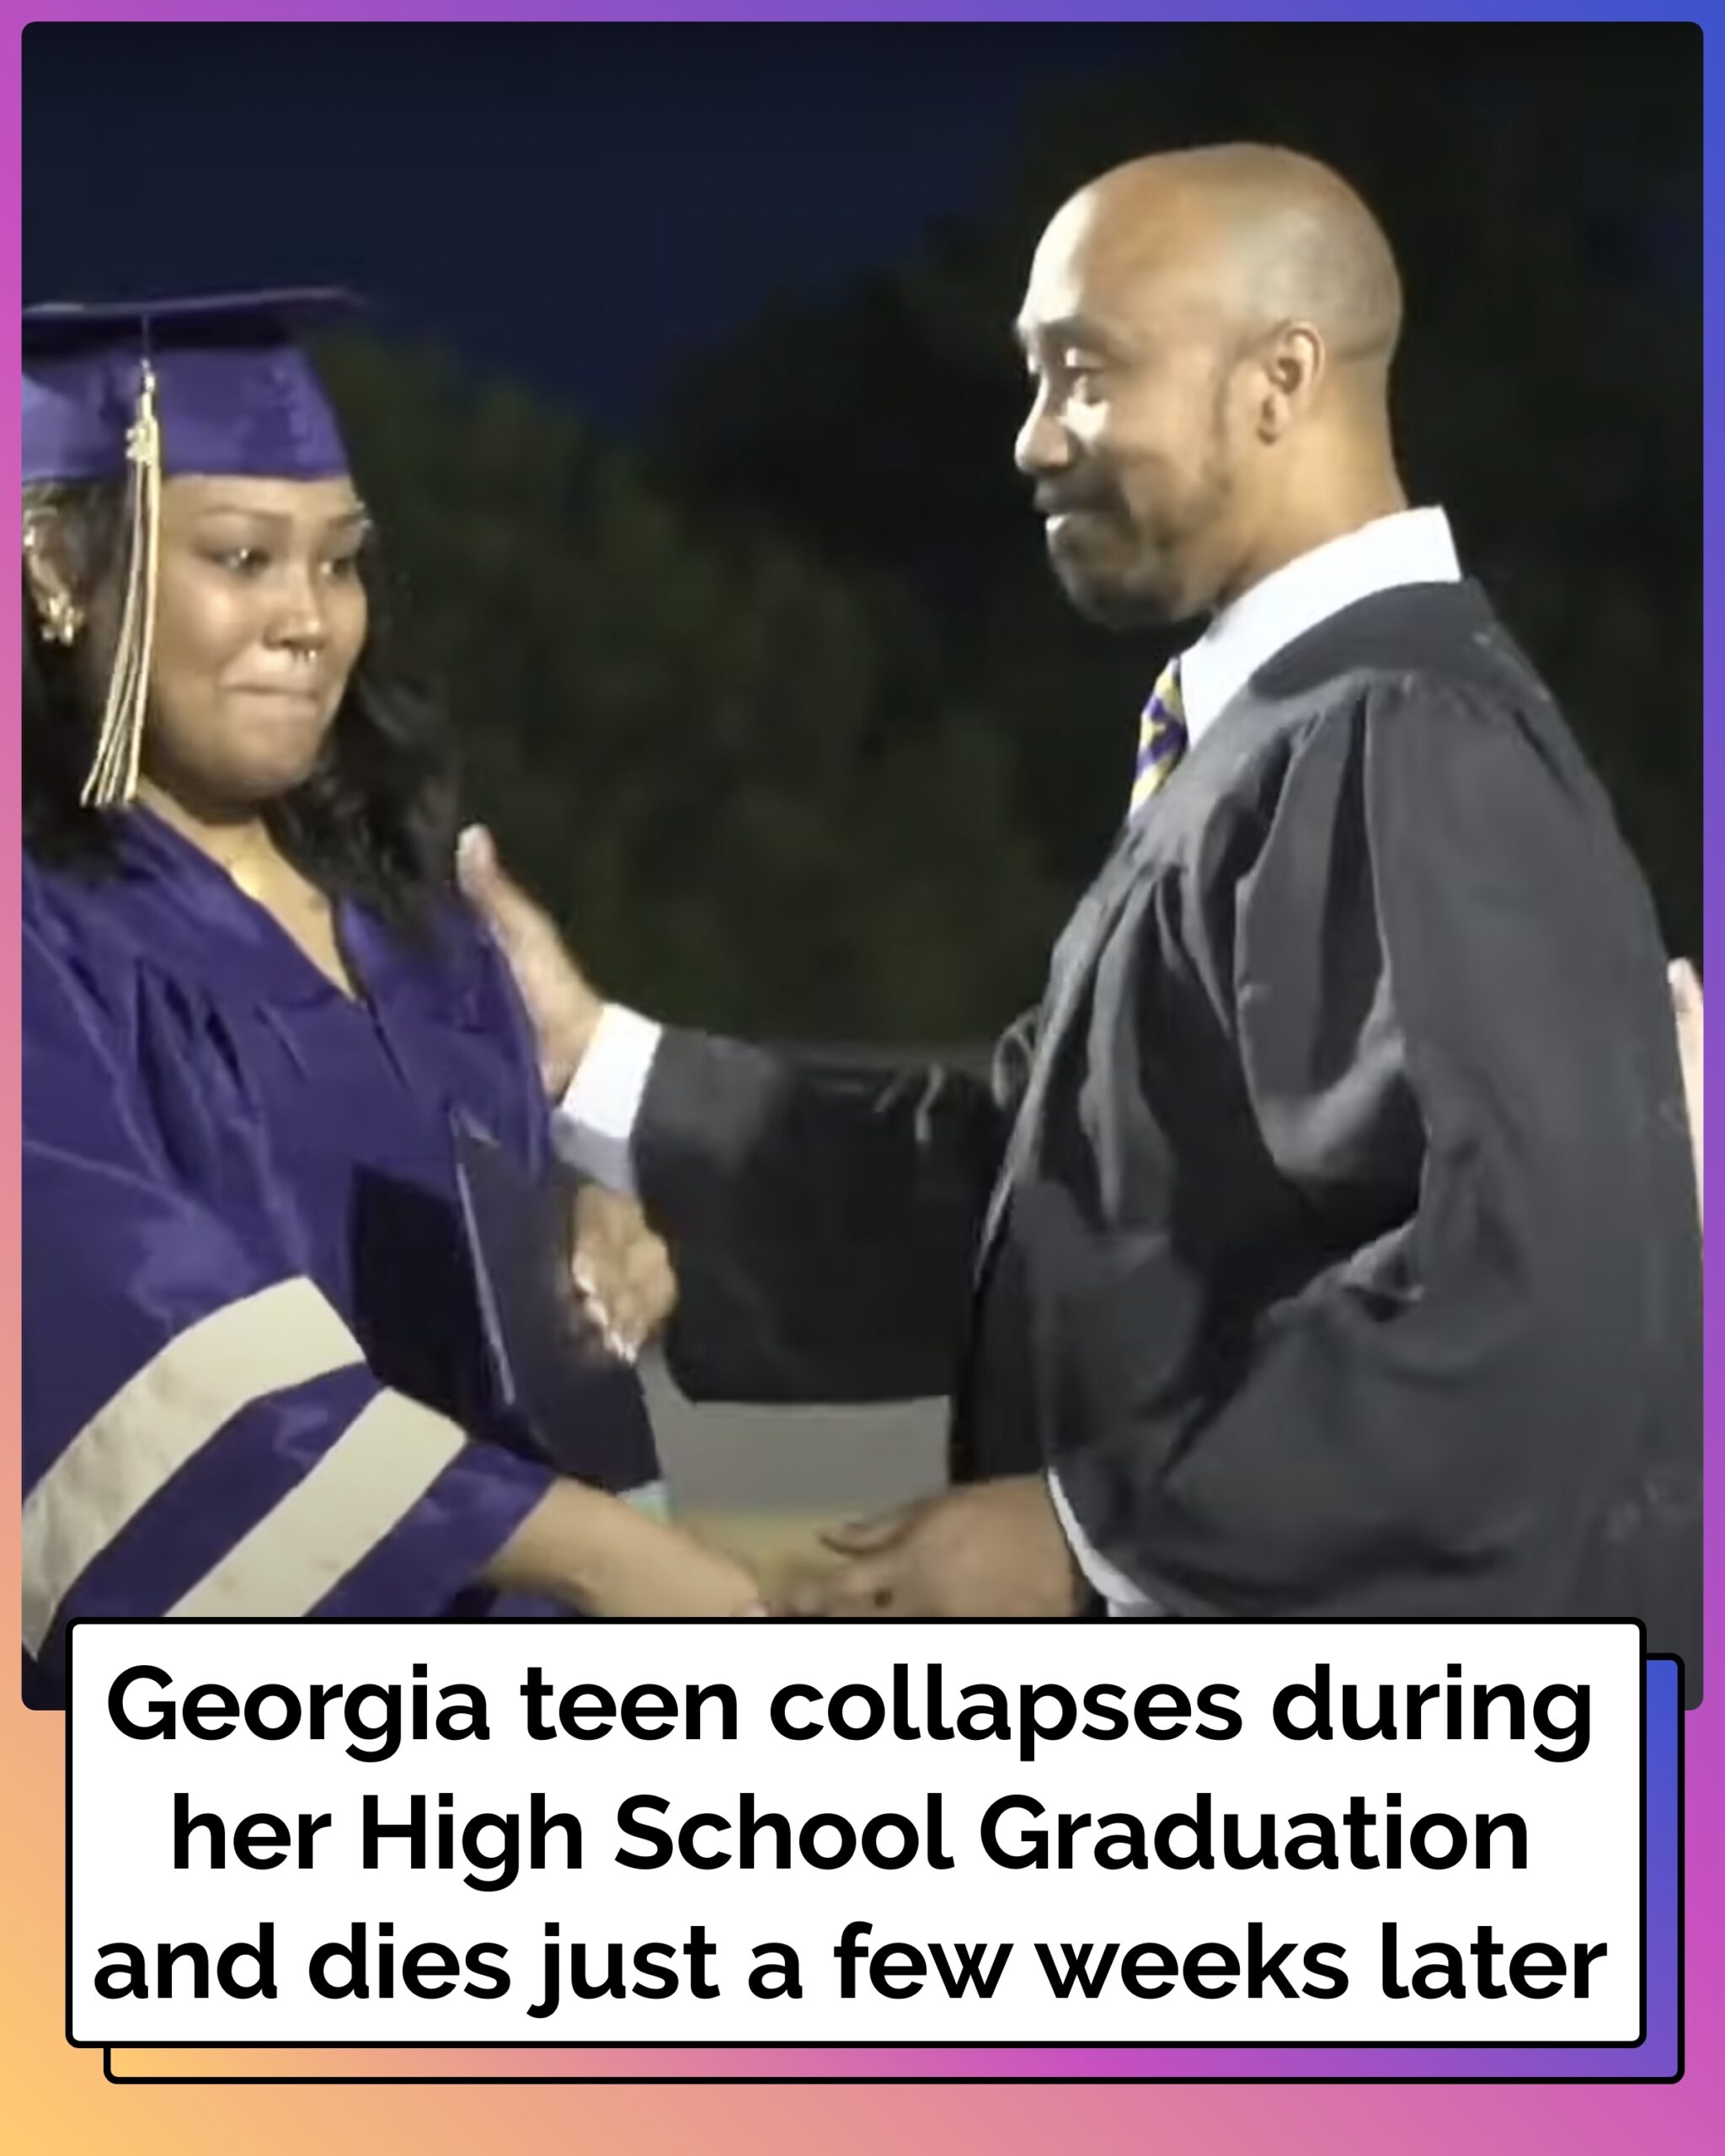 Georgia Teen Collapses during Her High School Graduation and Dies Just a Few Weeks Later